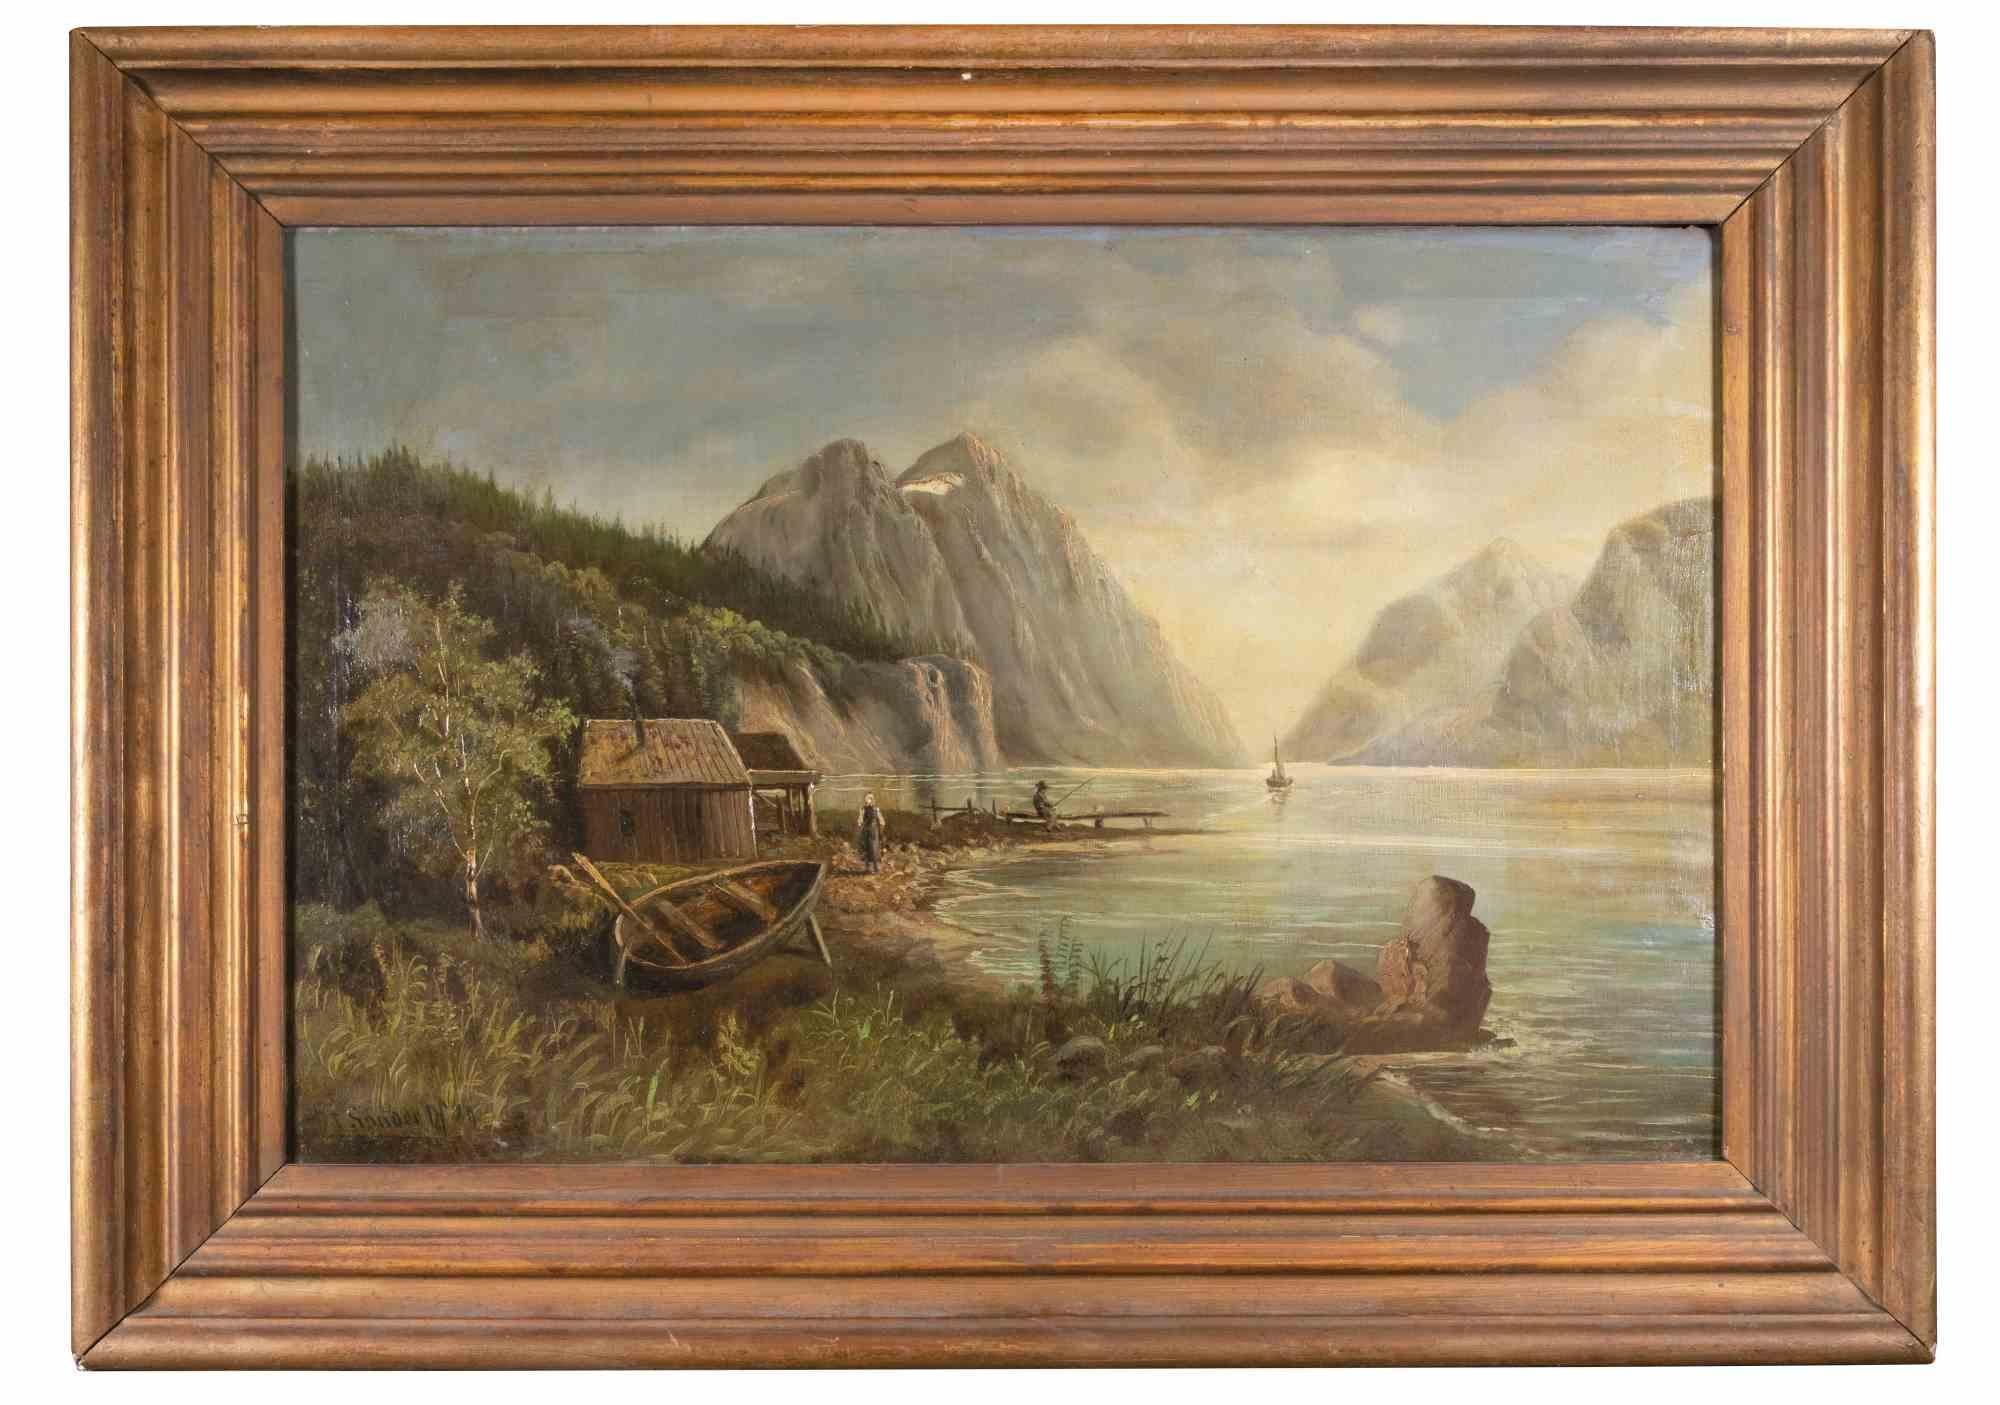 The Lake -  Oil Paint attr. to Tom Sander - 1989